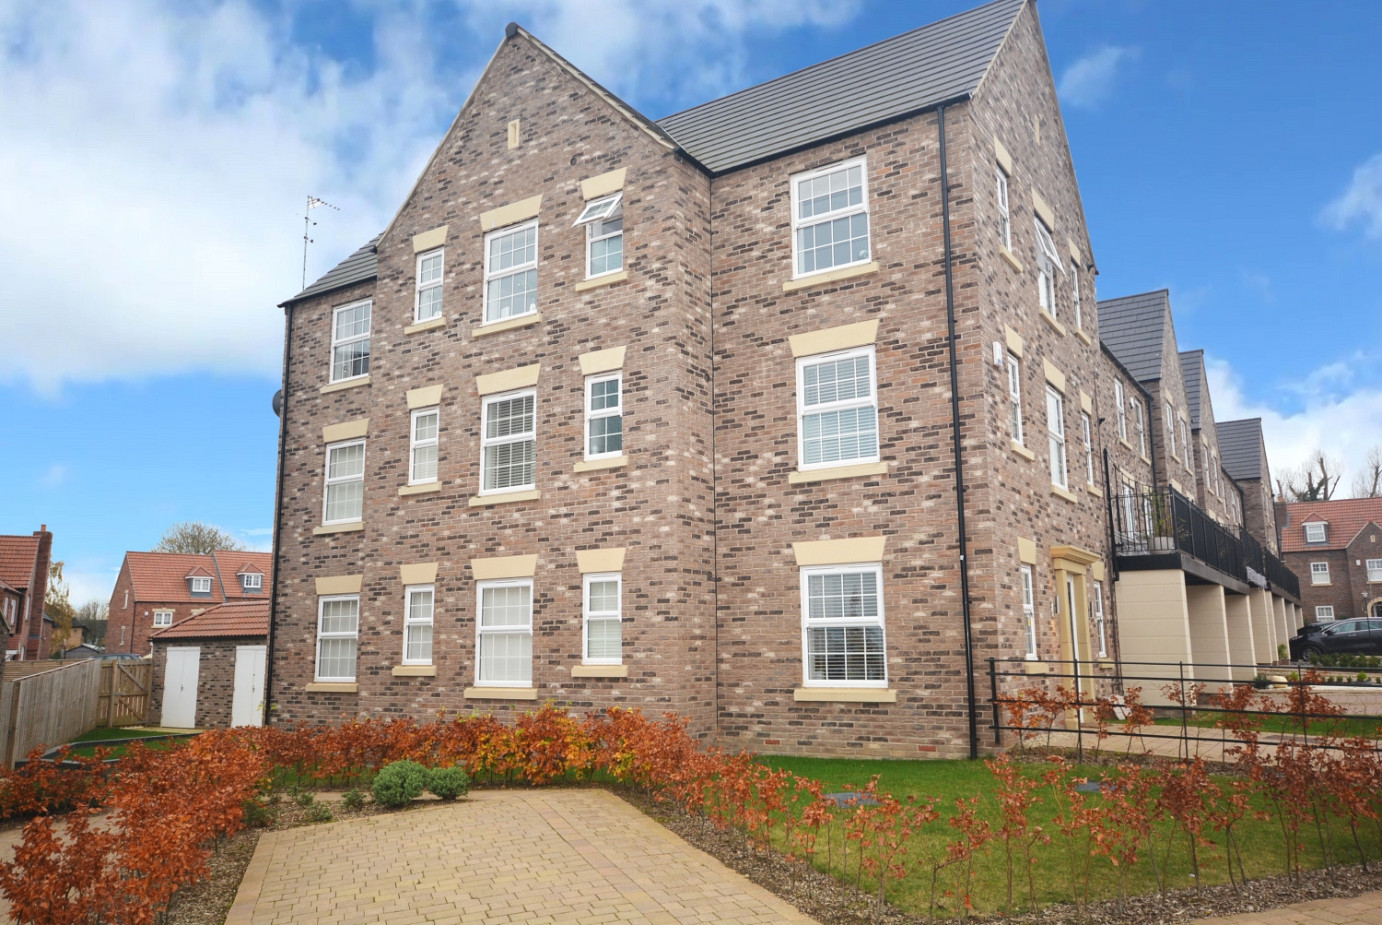 Montagu Crescent, Spofforth Hill, Wetherby, West Yorkshire, LS23 6BE